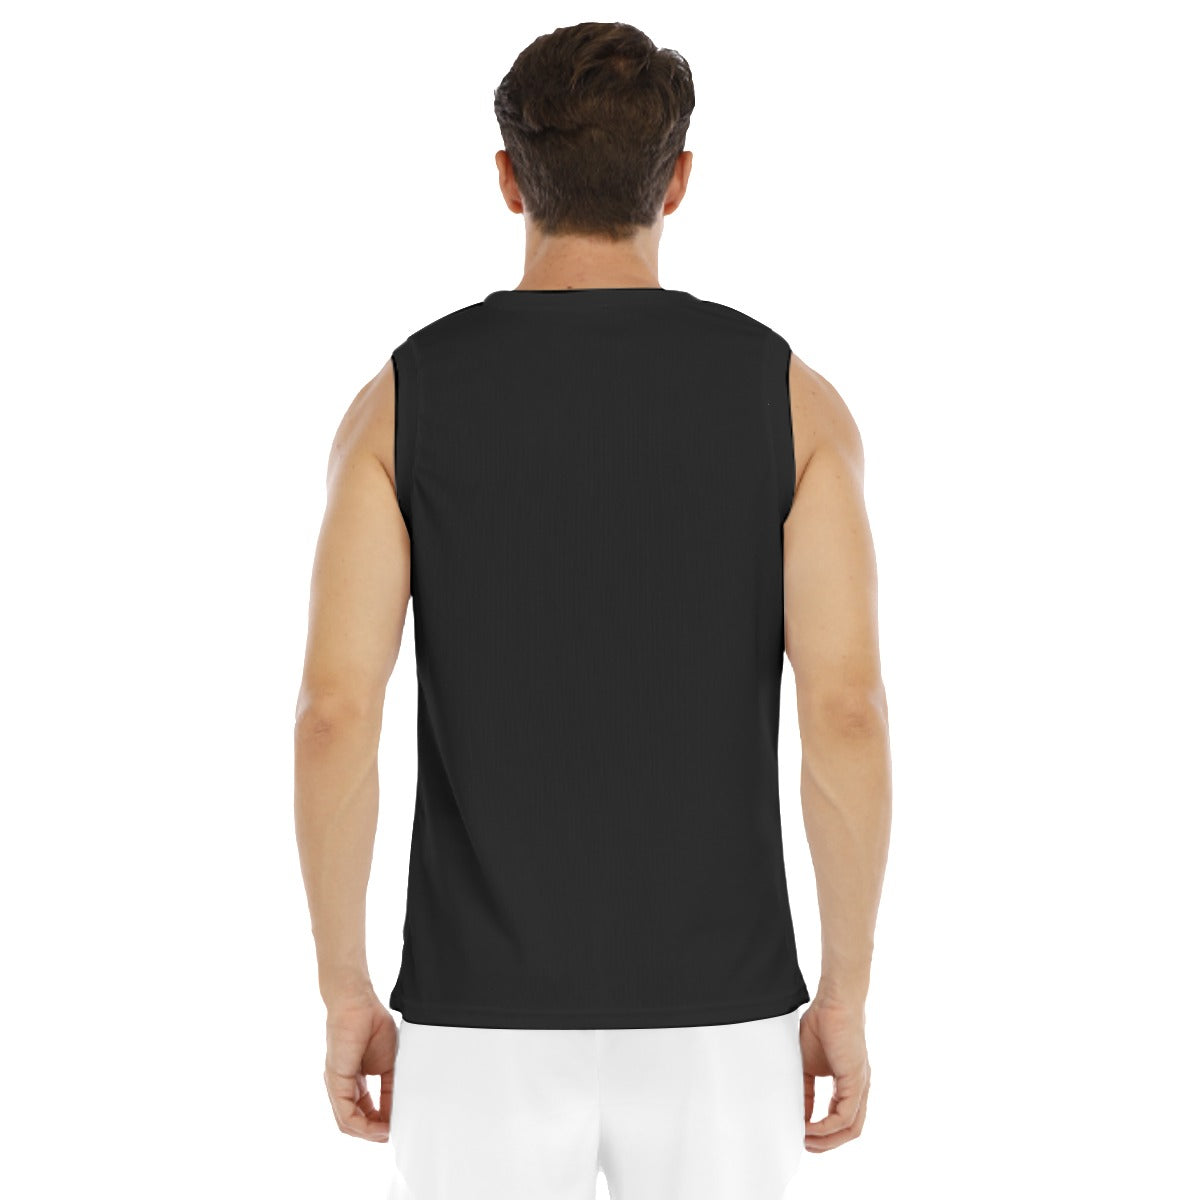 There Is No Greater Love Black Men's Sports Vest